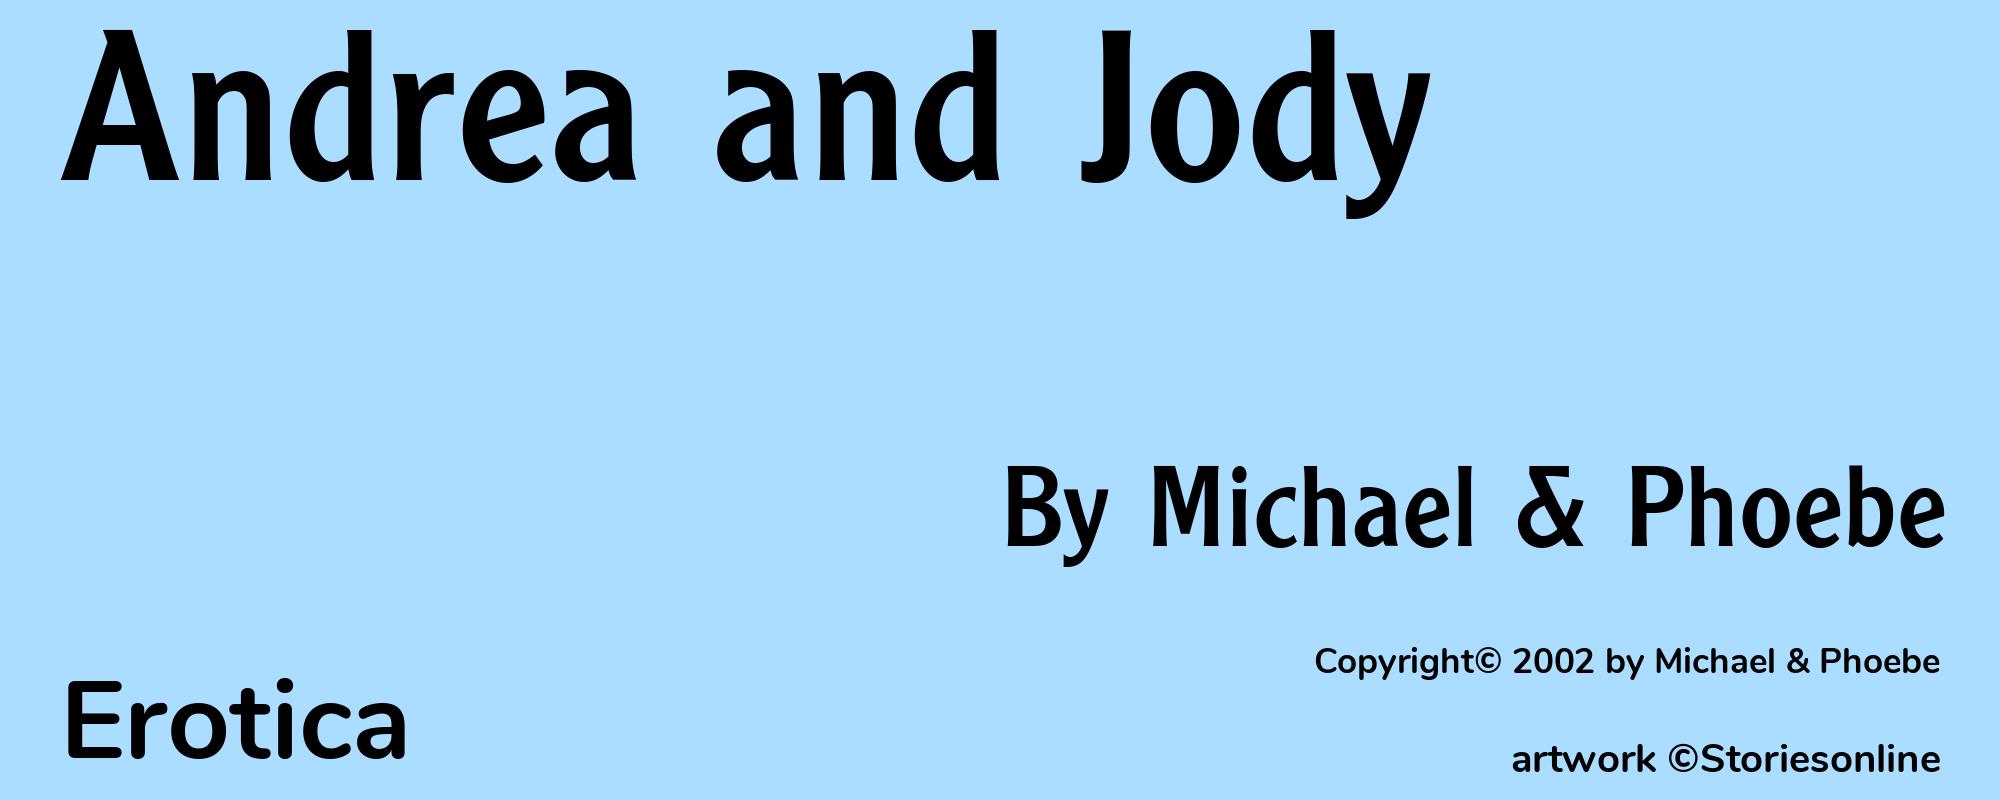 Andrea and Jody - Cover